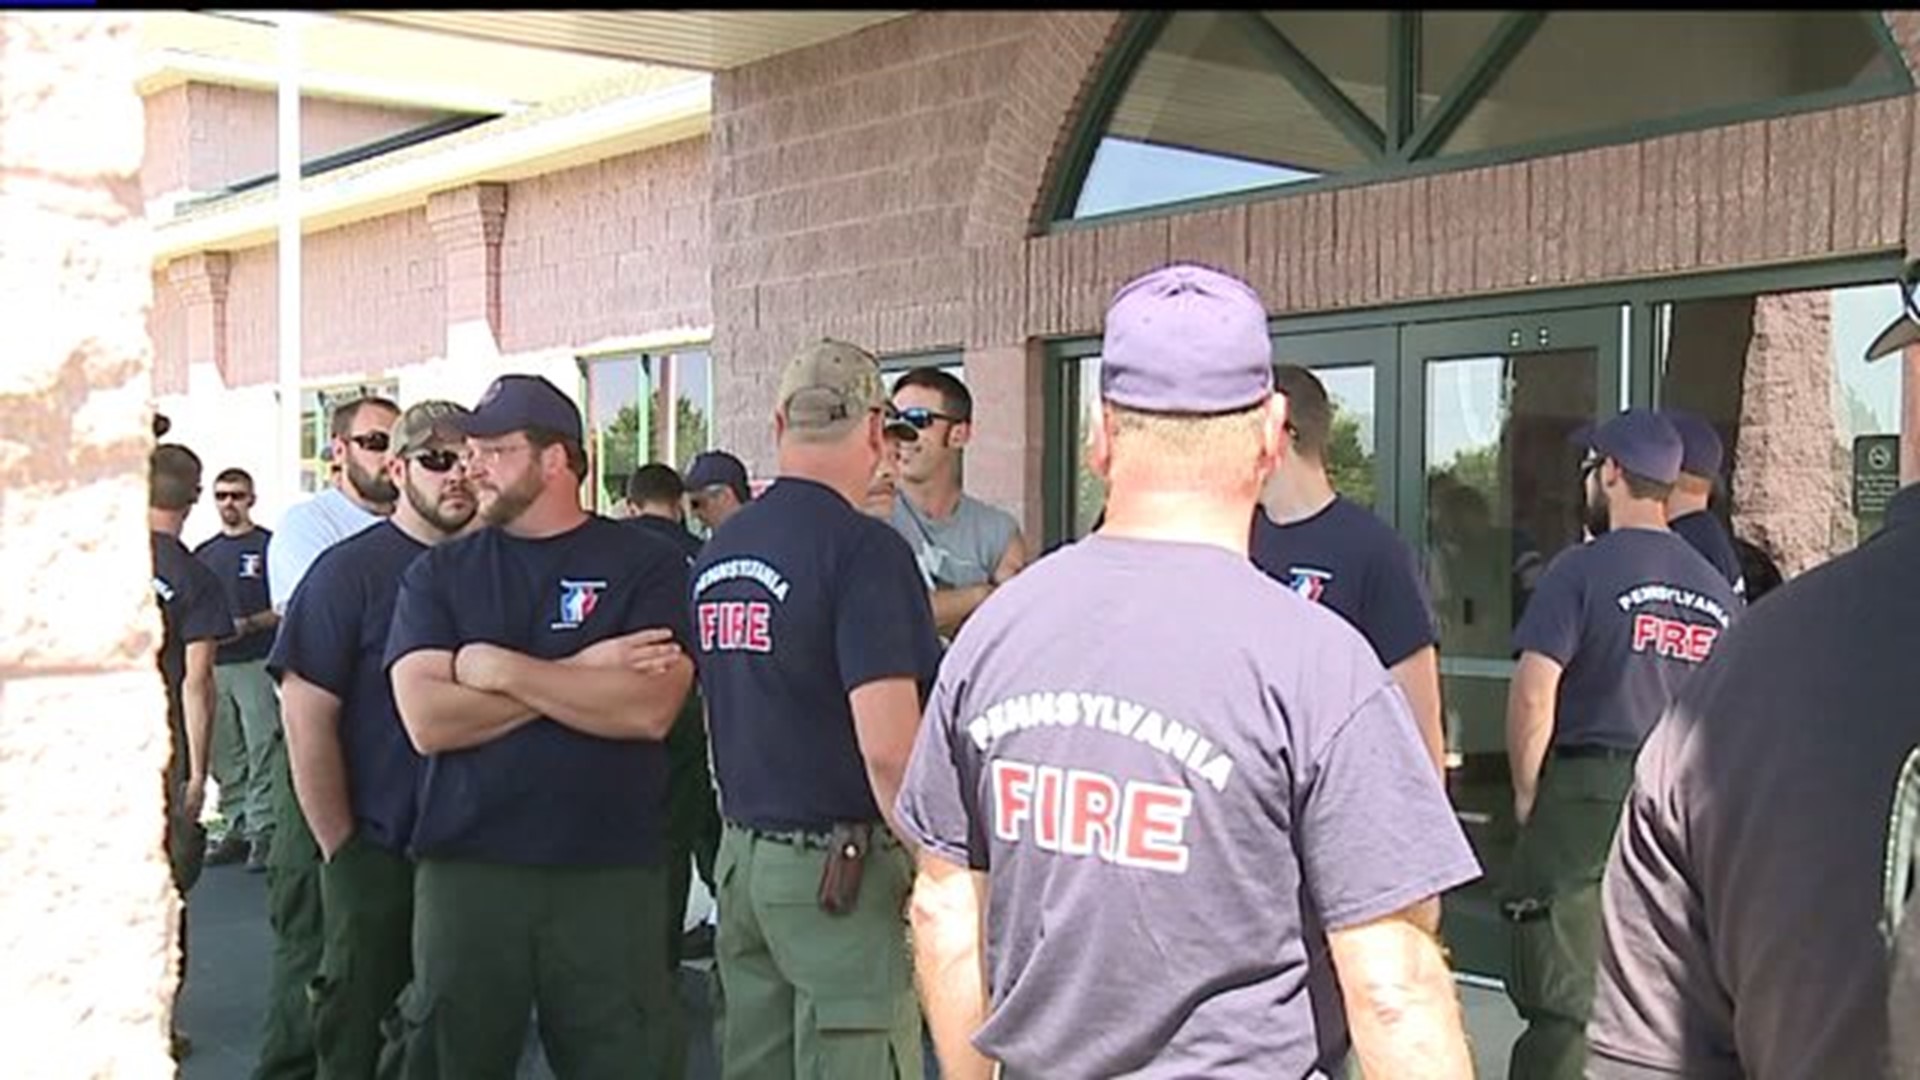 PA Firefighters heading to California to fight wildfires